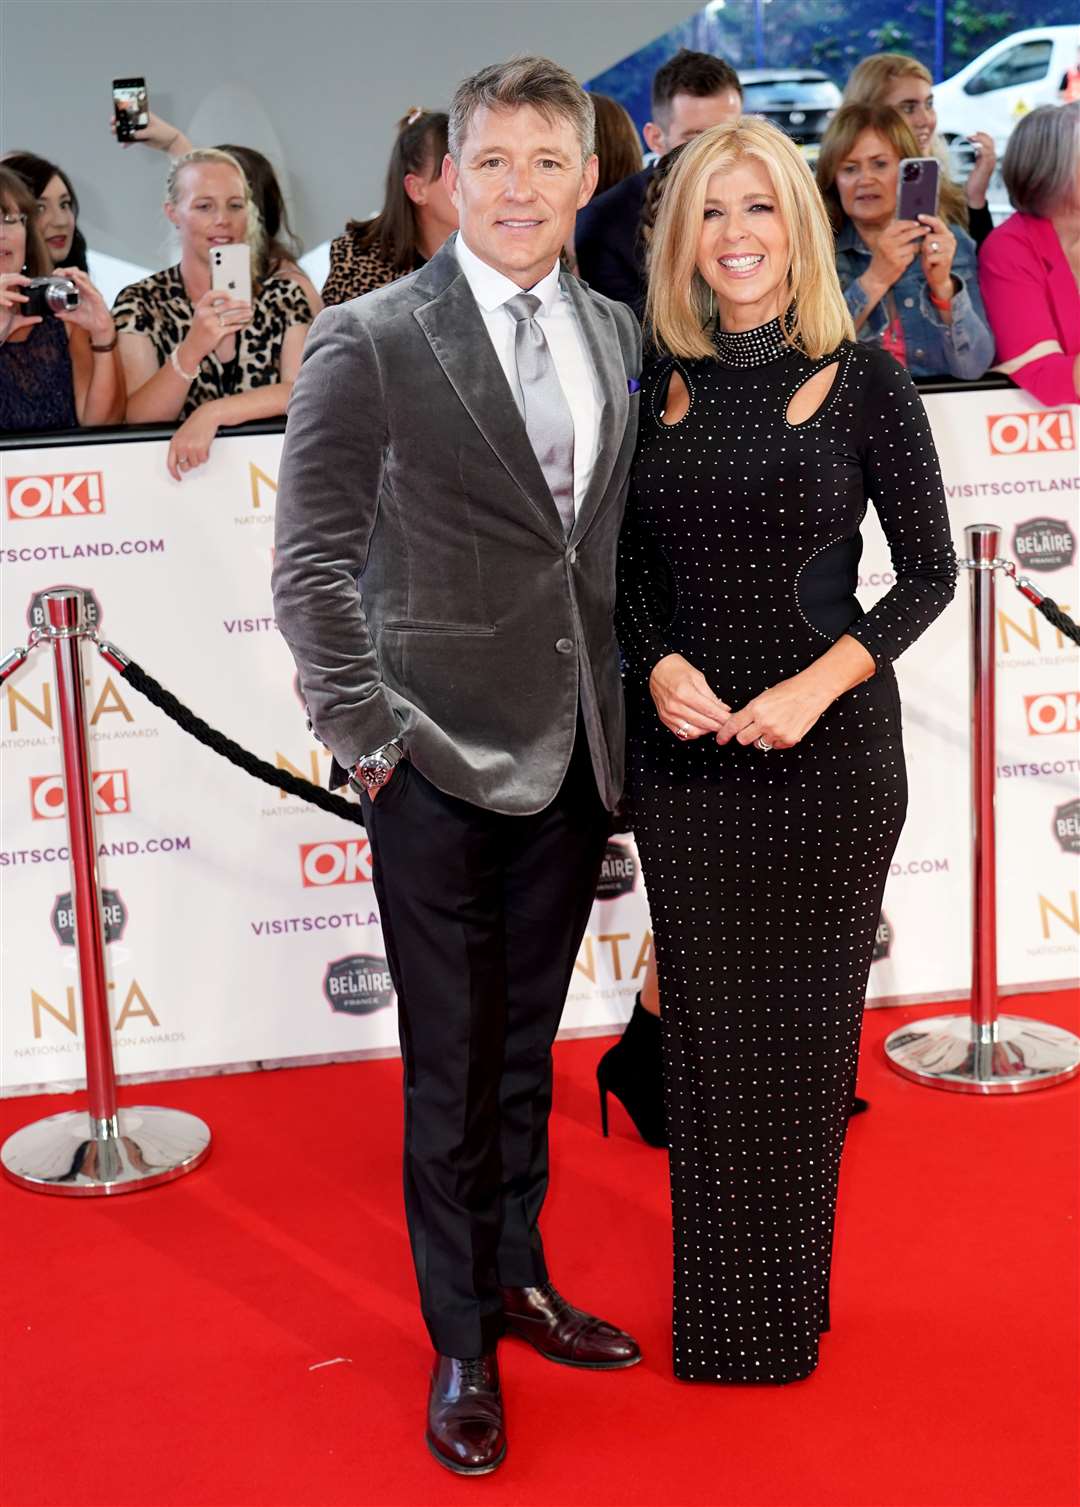 Ben Shephard and Kate Garraway have been a presenting duo on Good Morning Britain (PA)